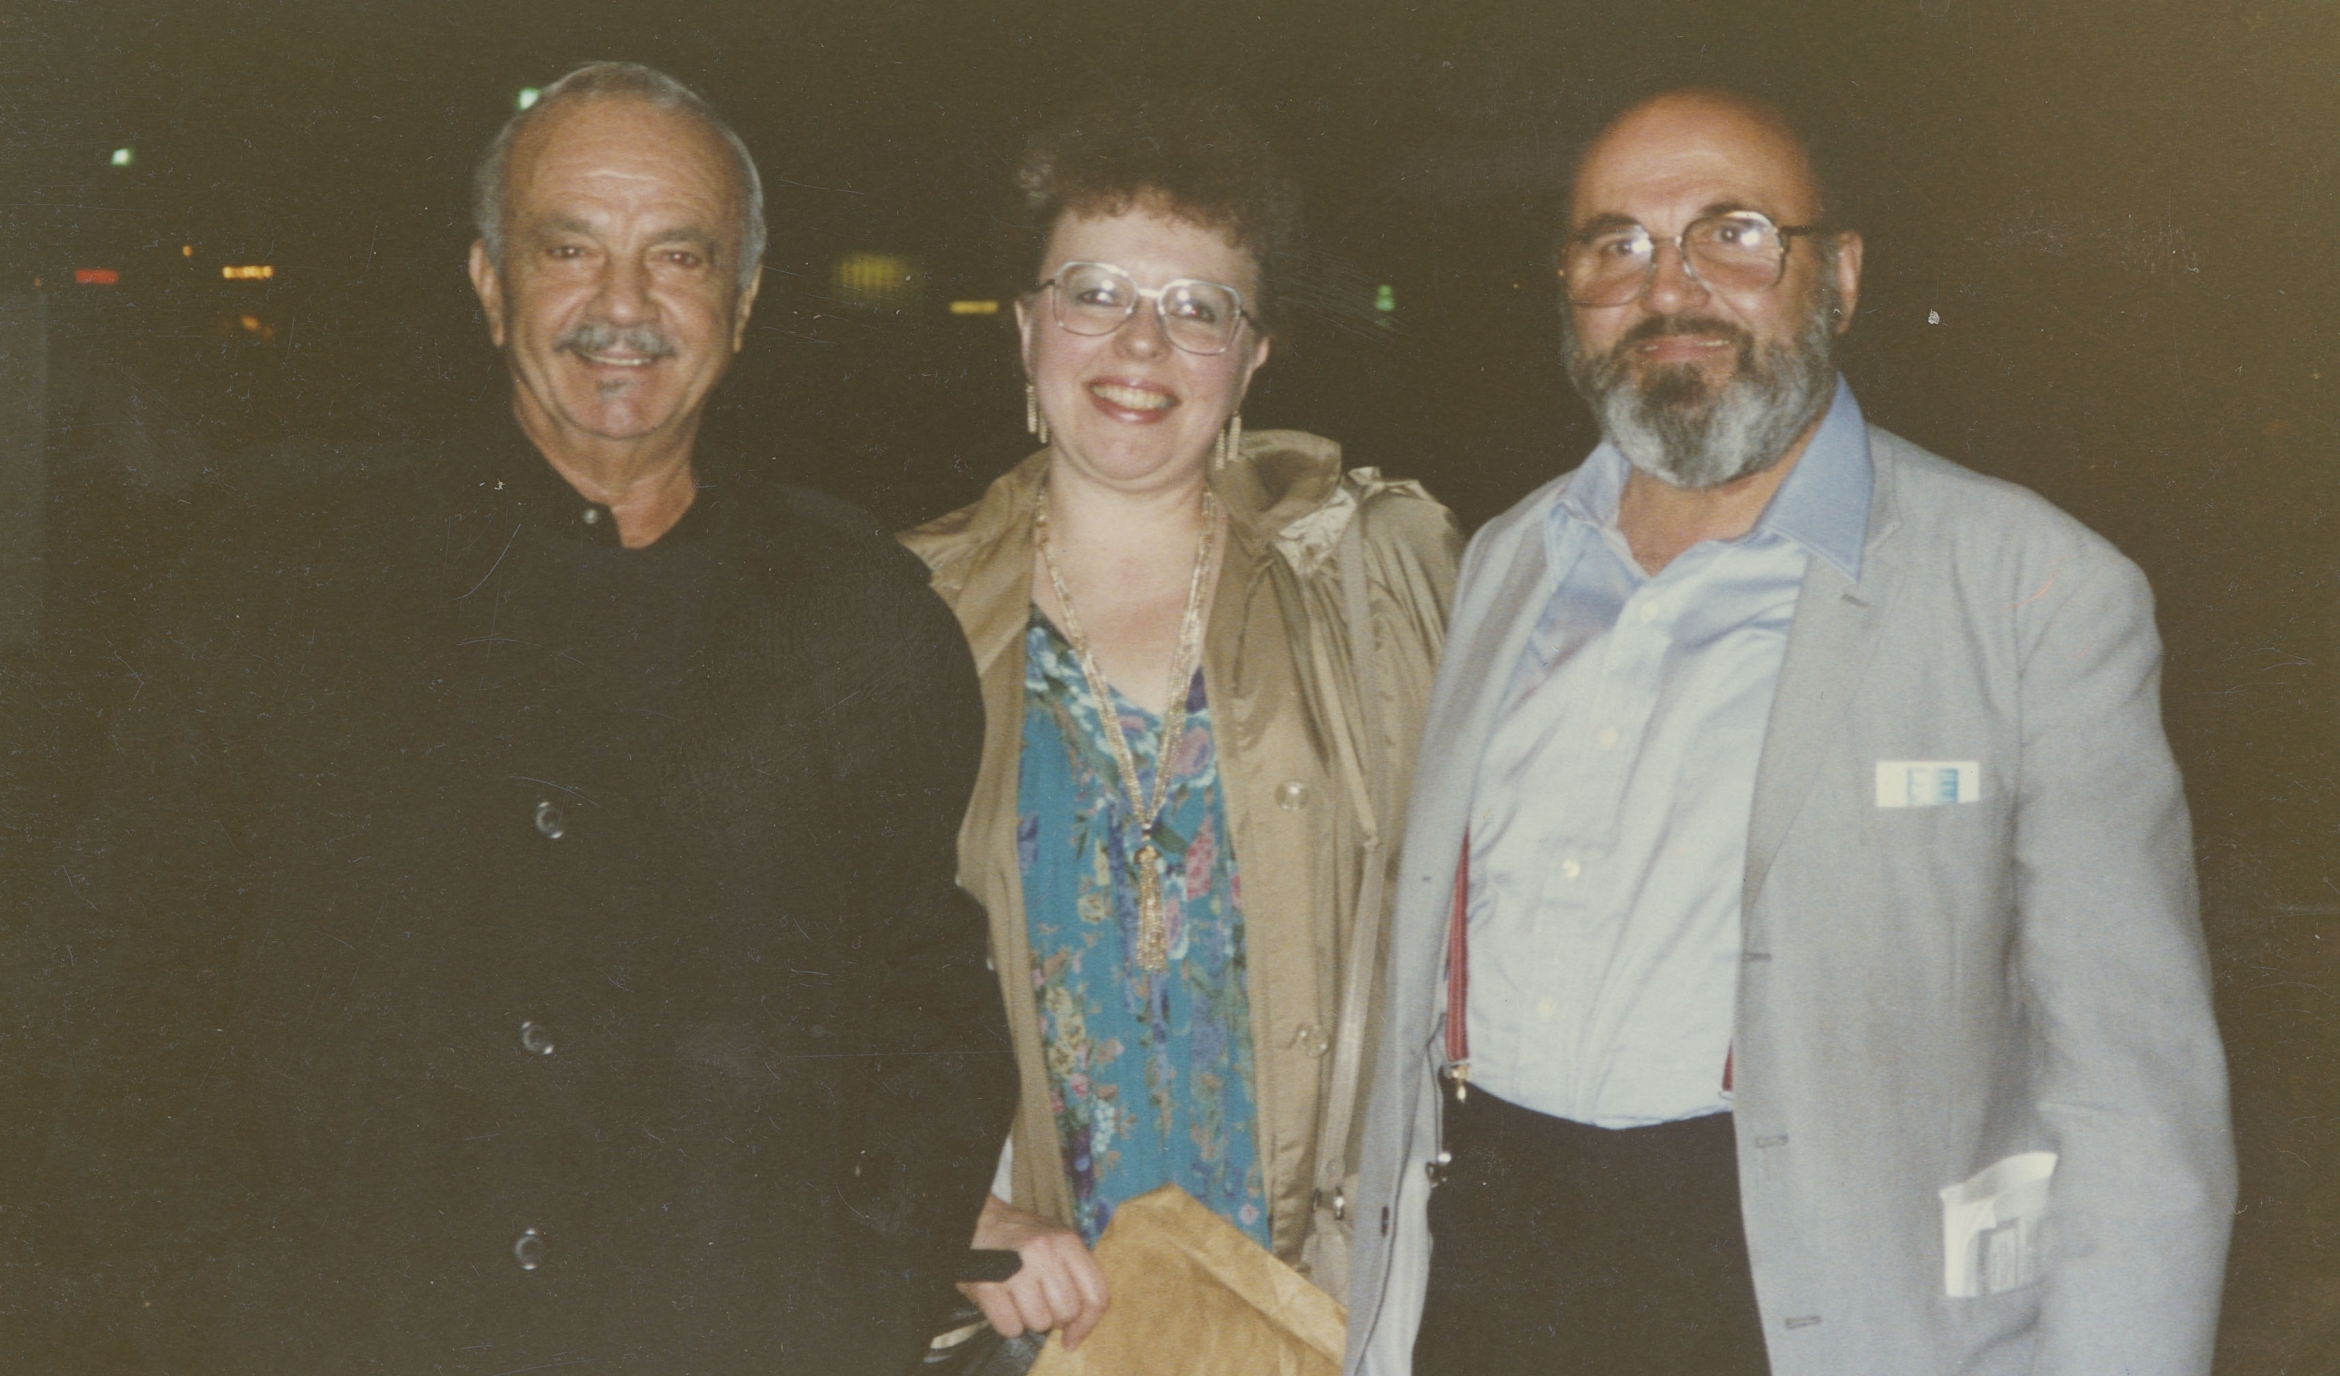 Vast tango archive of Argentine composer Astor Piazzolla funded for preservation; "From left, Astor Piazzolla, Jocelyn Howells and Edouard Pecourt in 1989 outside the Hult Center in Eugene, Oregon, during Piazzolla's final U.S. tour"